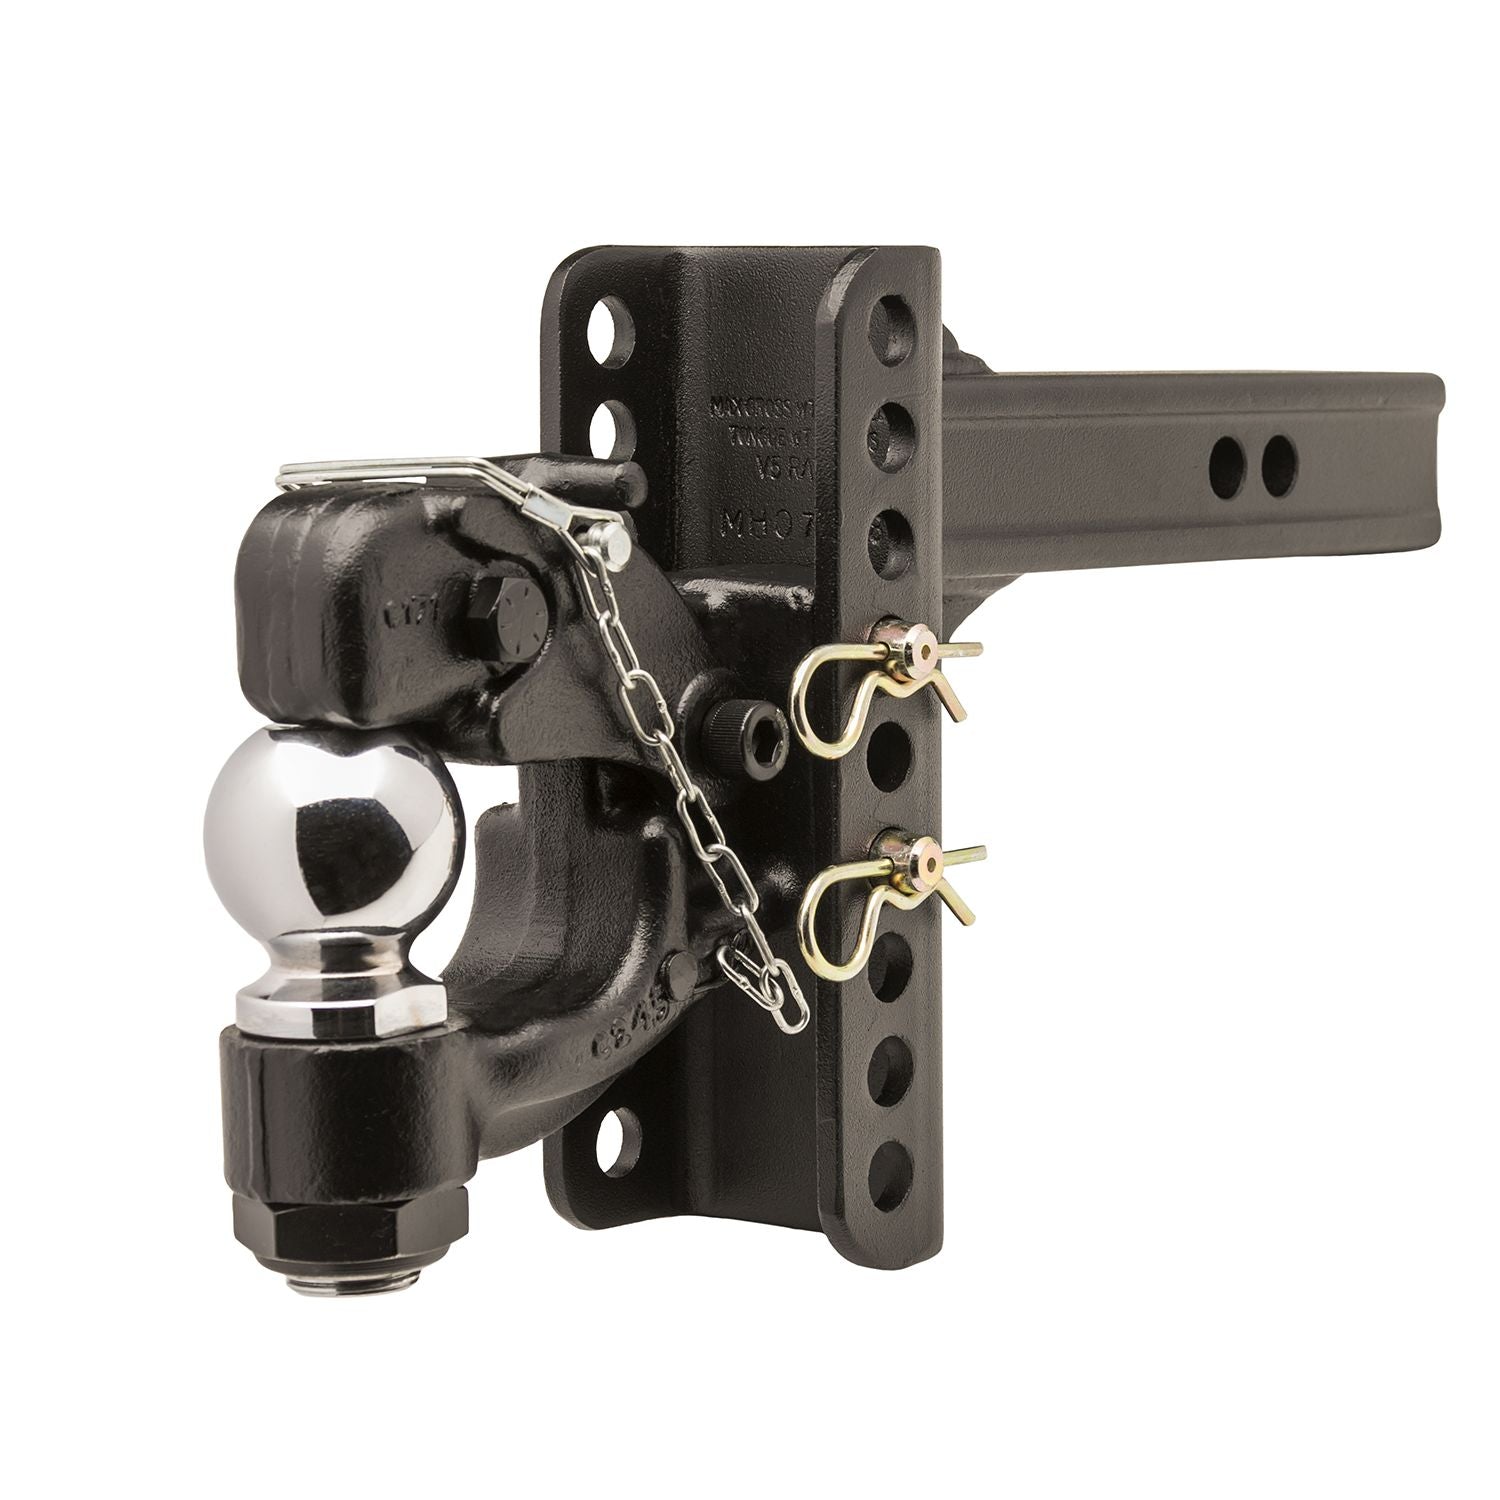 Goreks Pintle Hitch with 2-Inch Trailer Ball Combination, Heavy Duty Pintle Hook, Rated to Tow 10,000 Pound Load Capacity 639